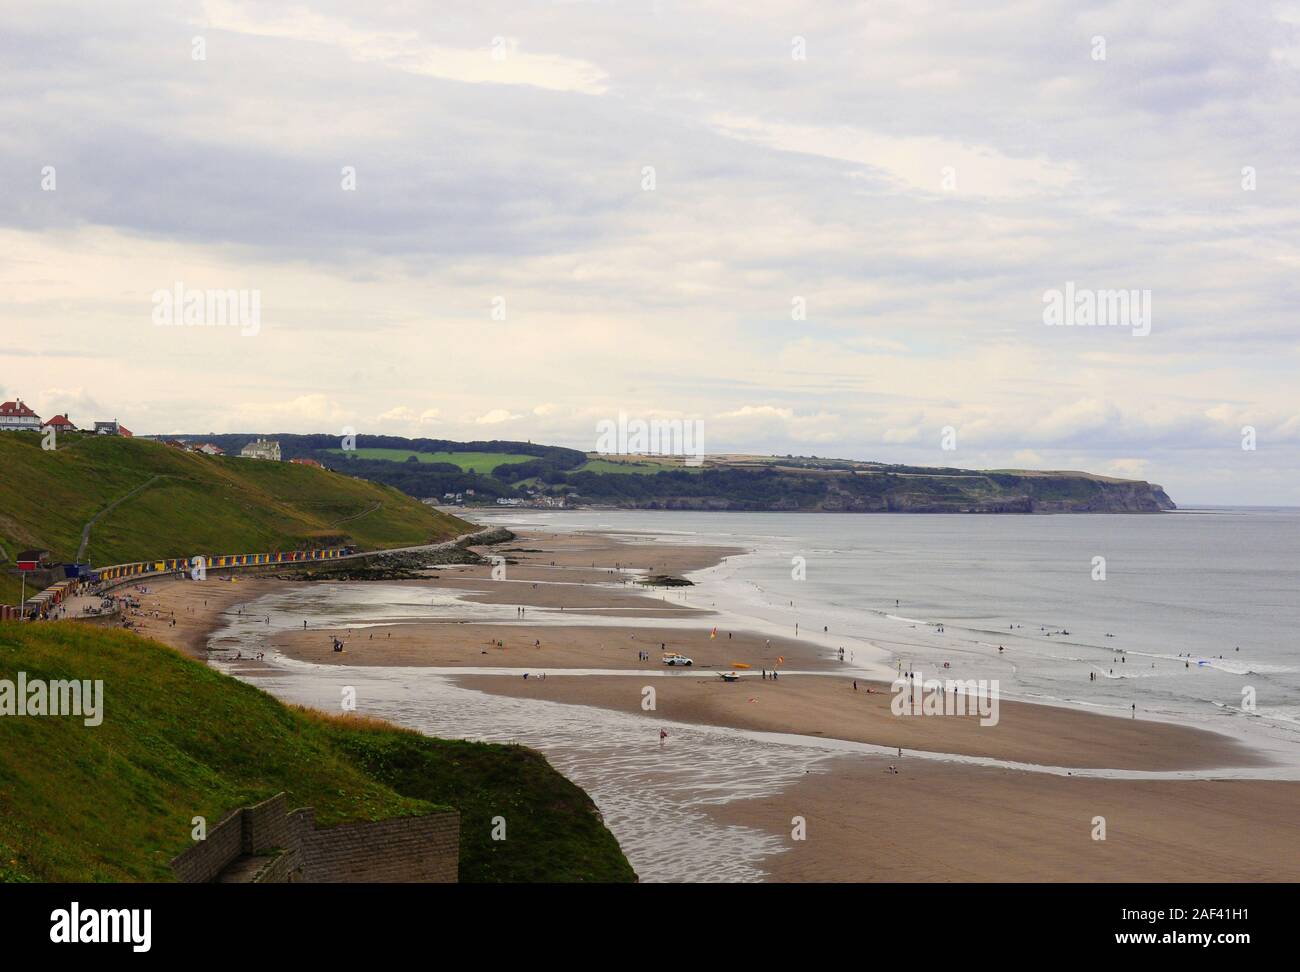 Whiby West Cliff Beach. Whitby Sands Beach. Foto de stock